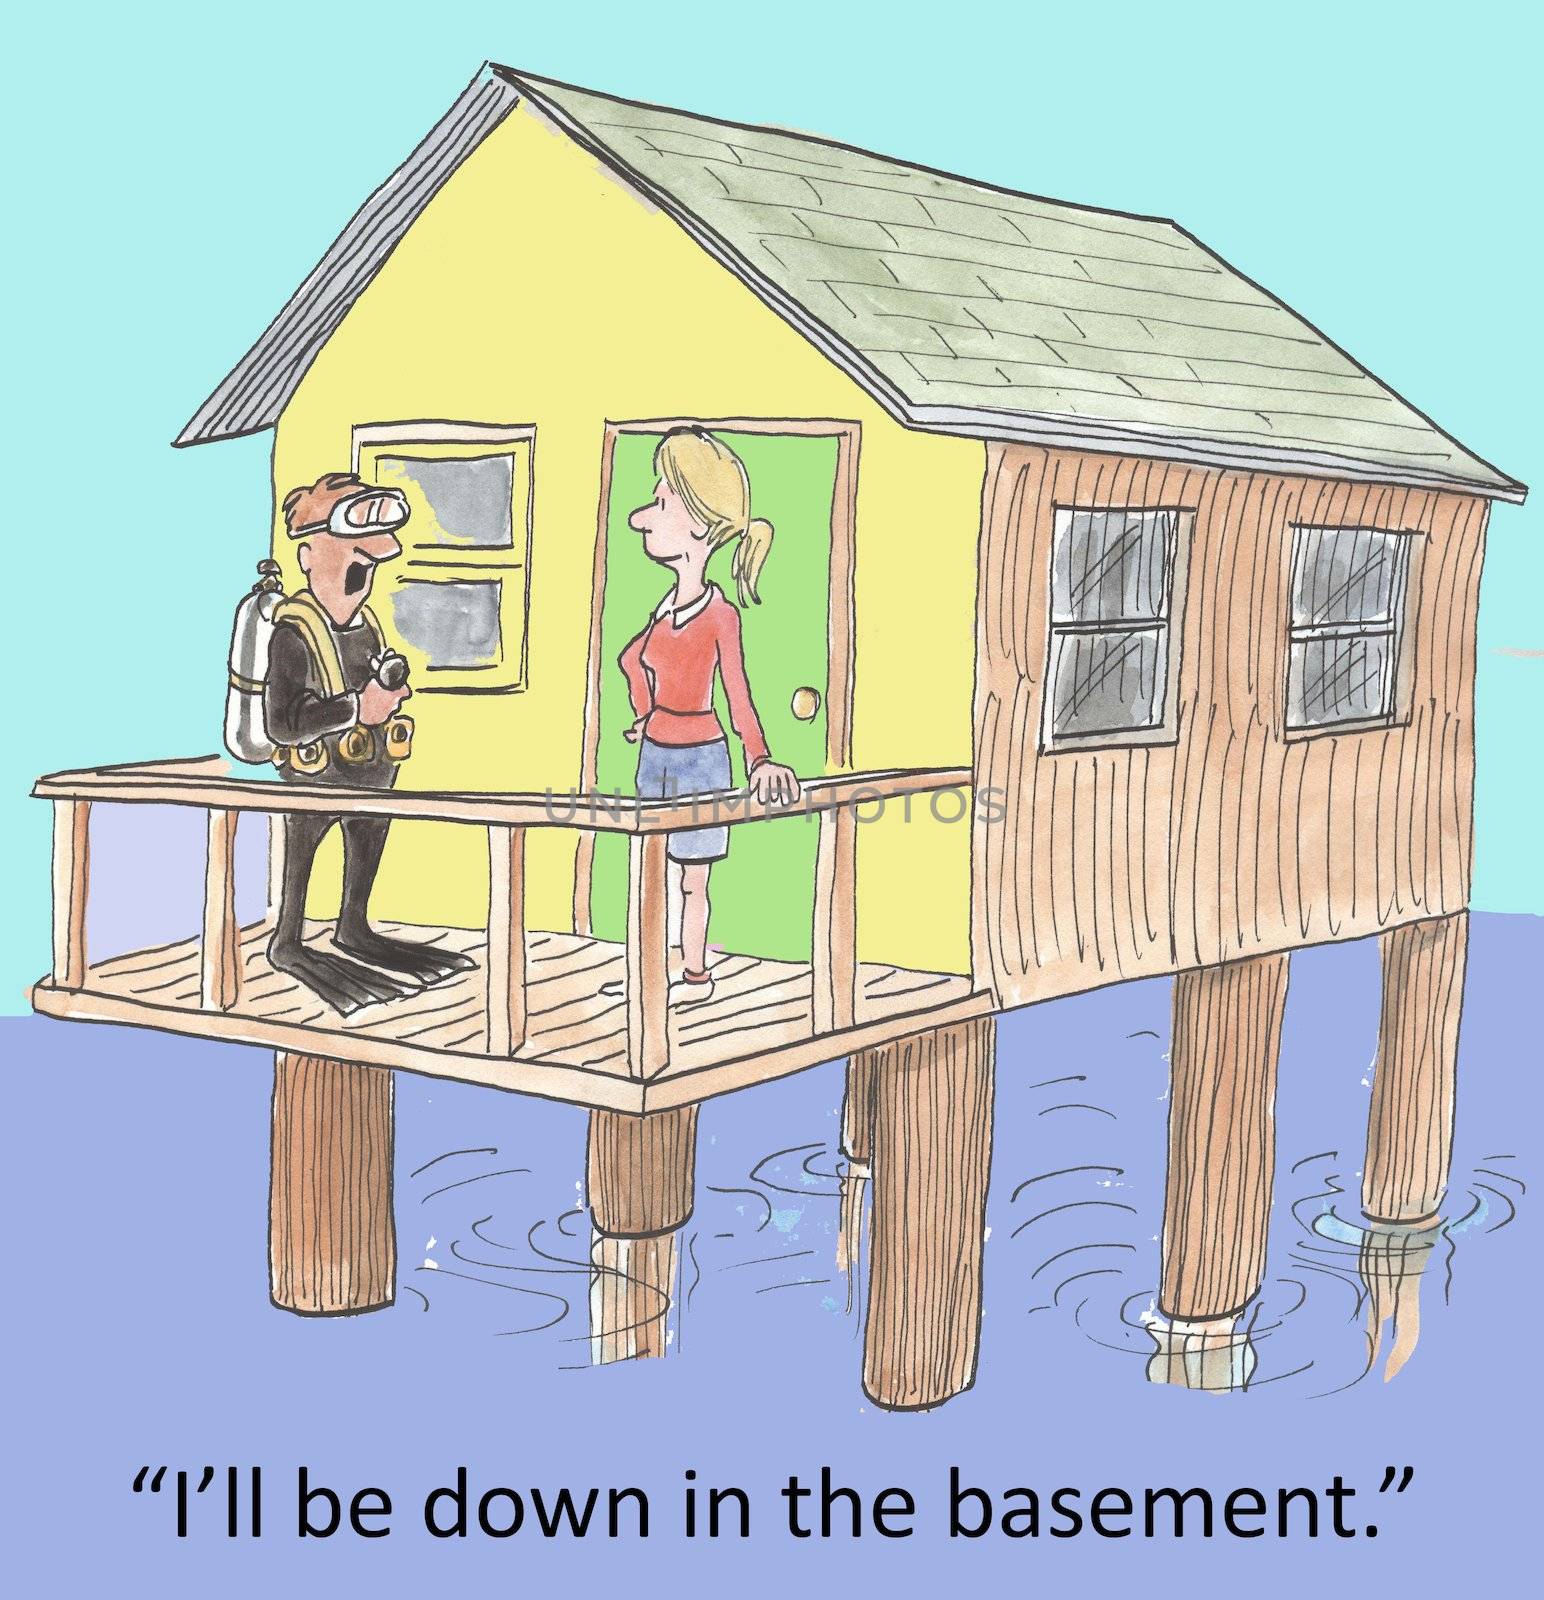 "I'll be down in the basement."